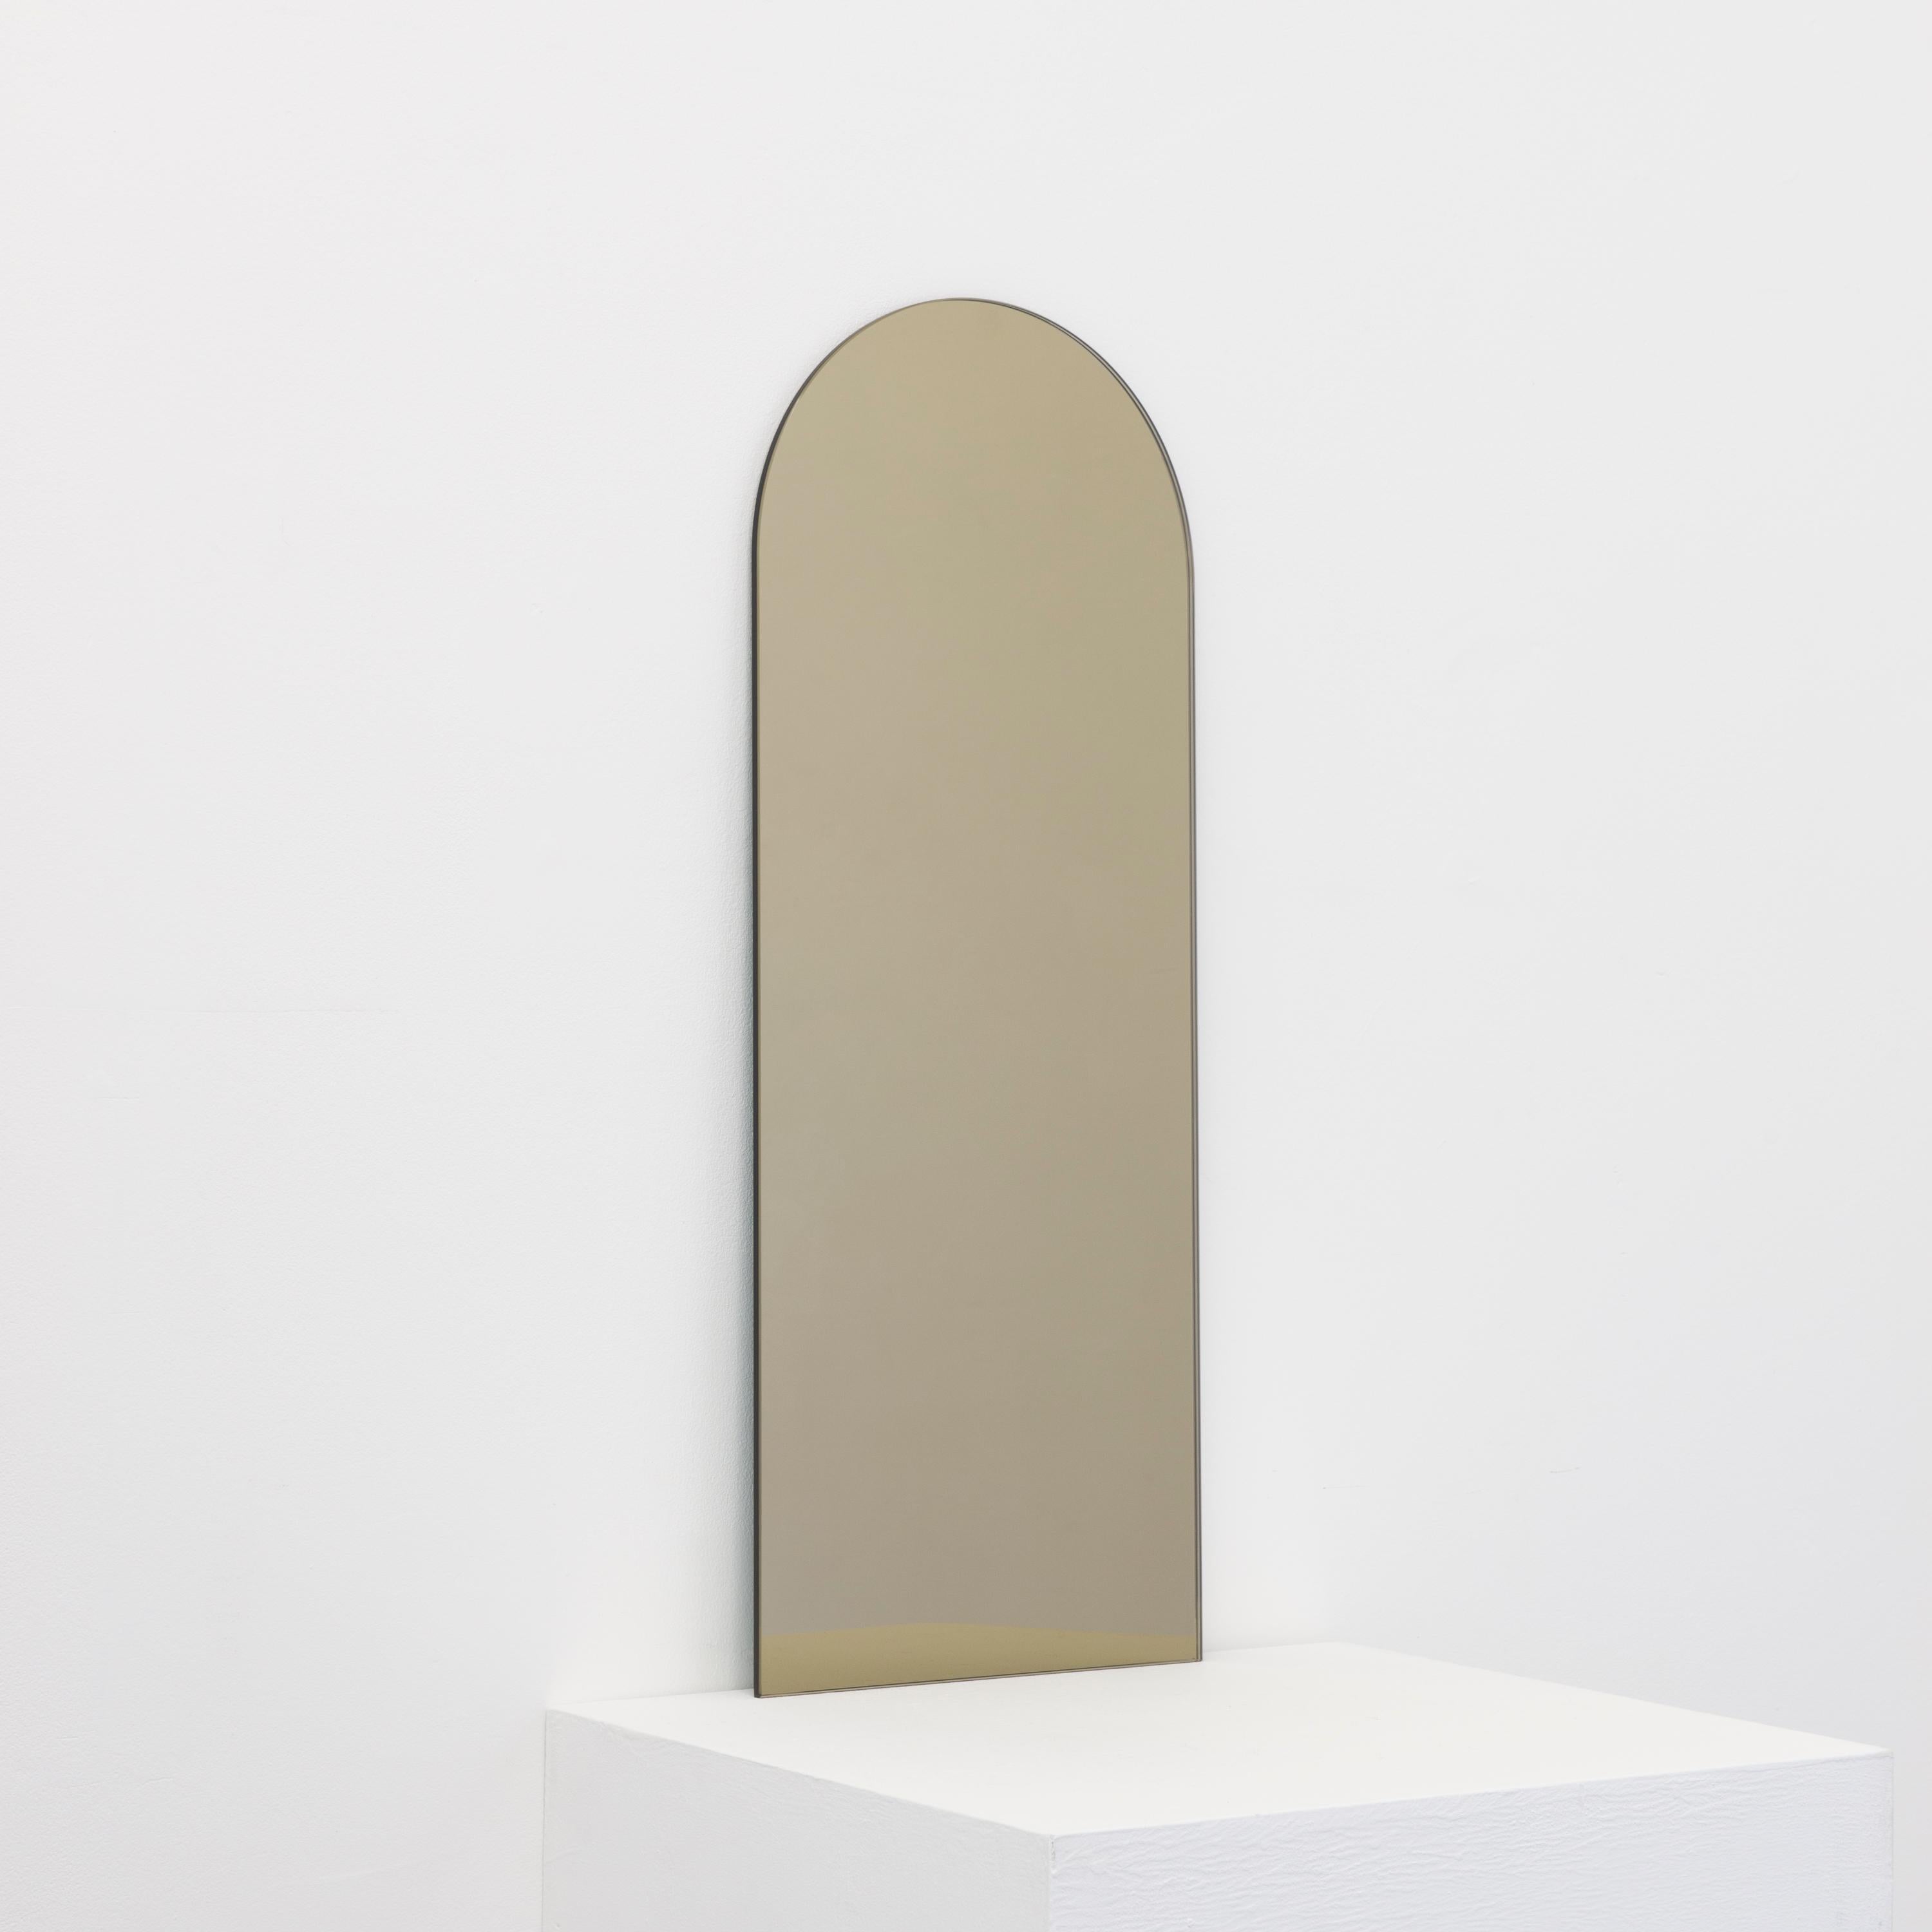 Minimalist Arcus™ arch shaped frameless bronze tinted mirror with a floating effect. Quality design that ensures the mirror sits perfectly parallel to the wall. Designed and made in London, UK.

Fitted with professional plates not visible once